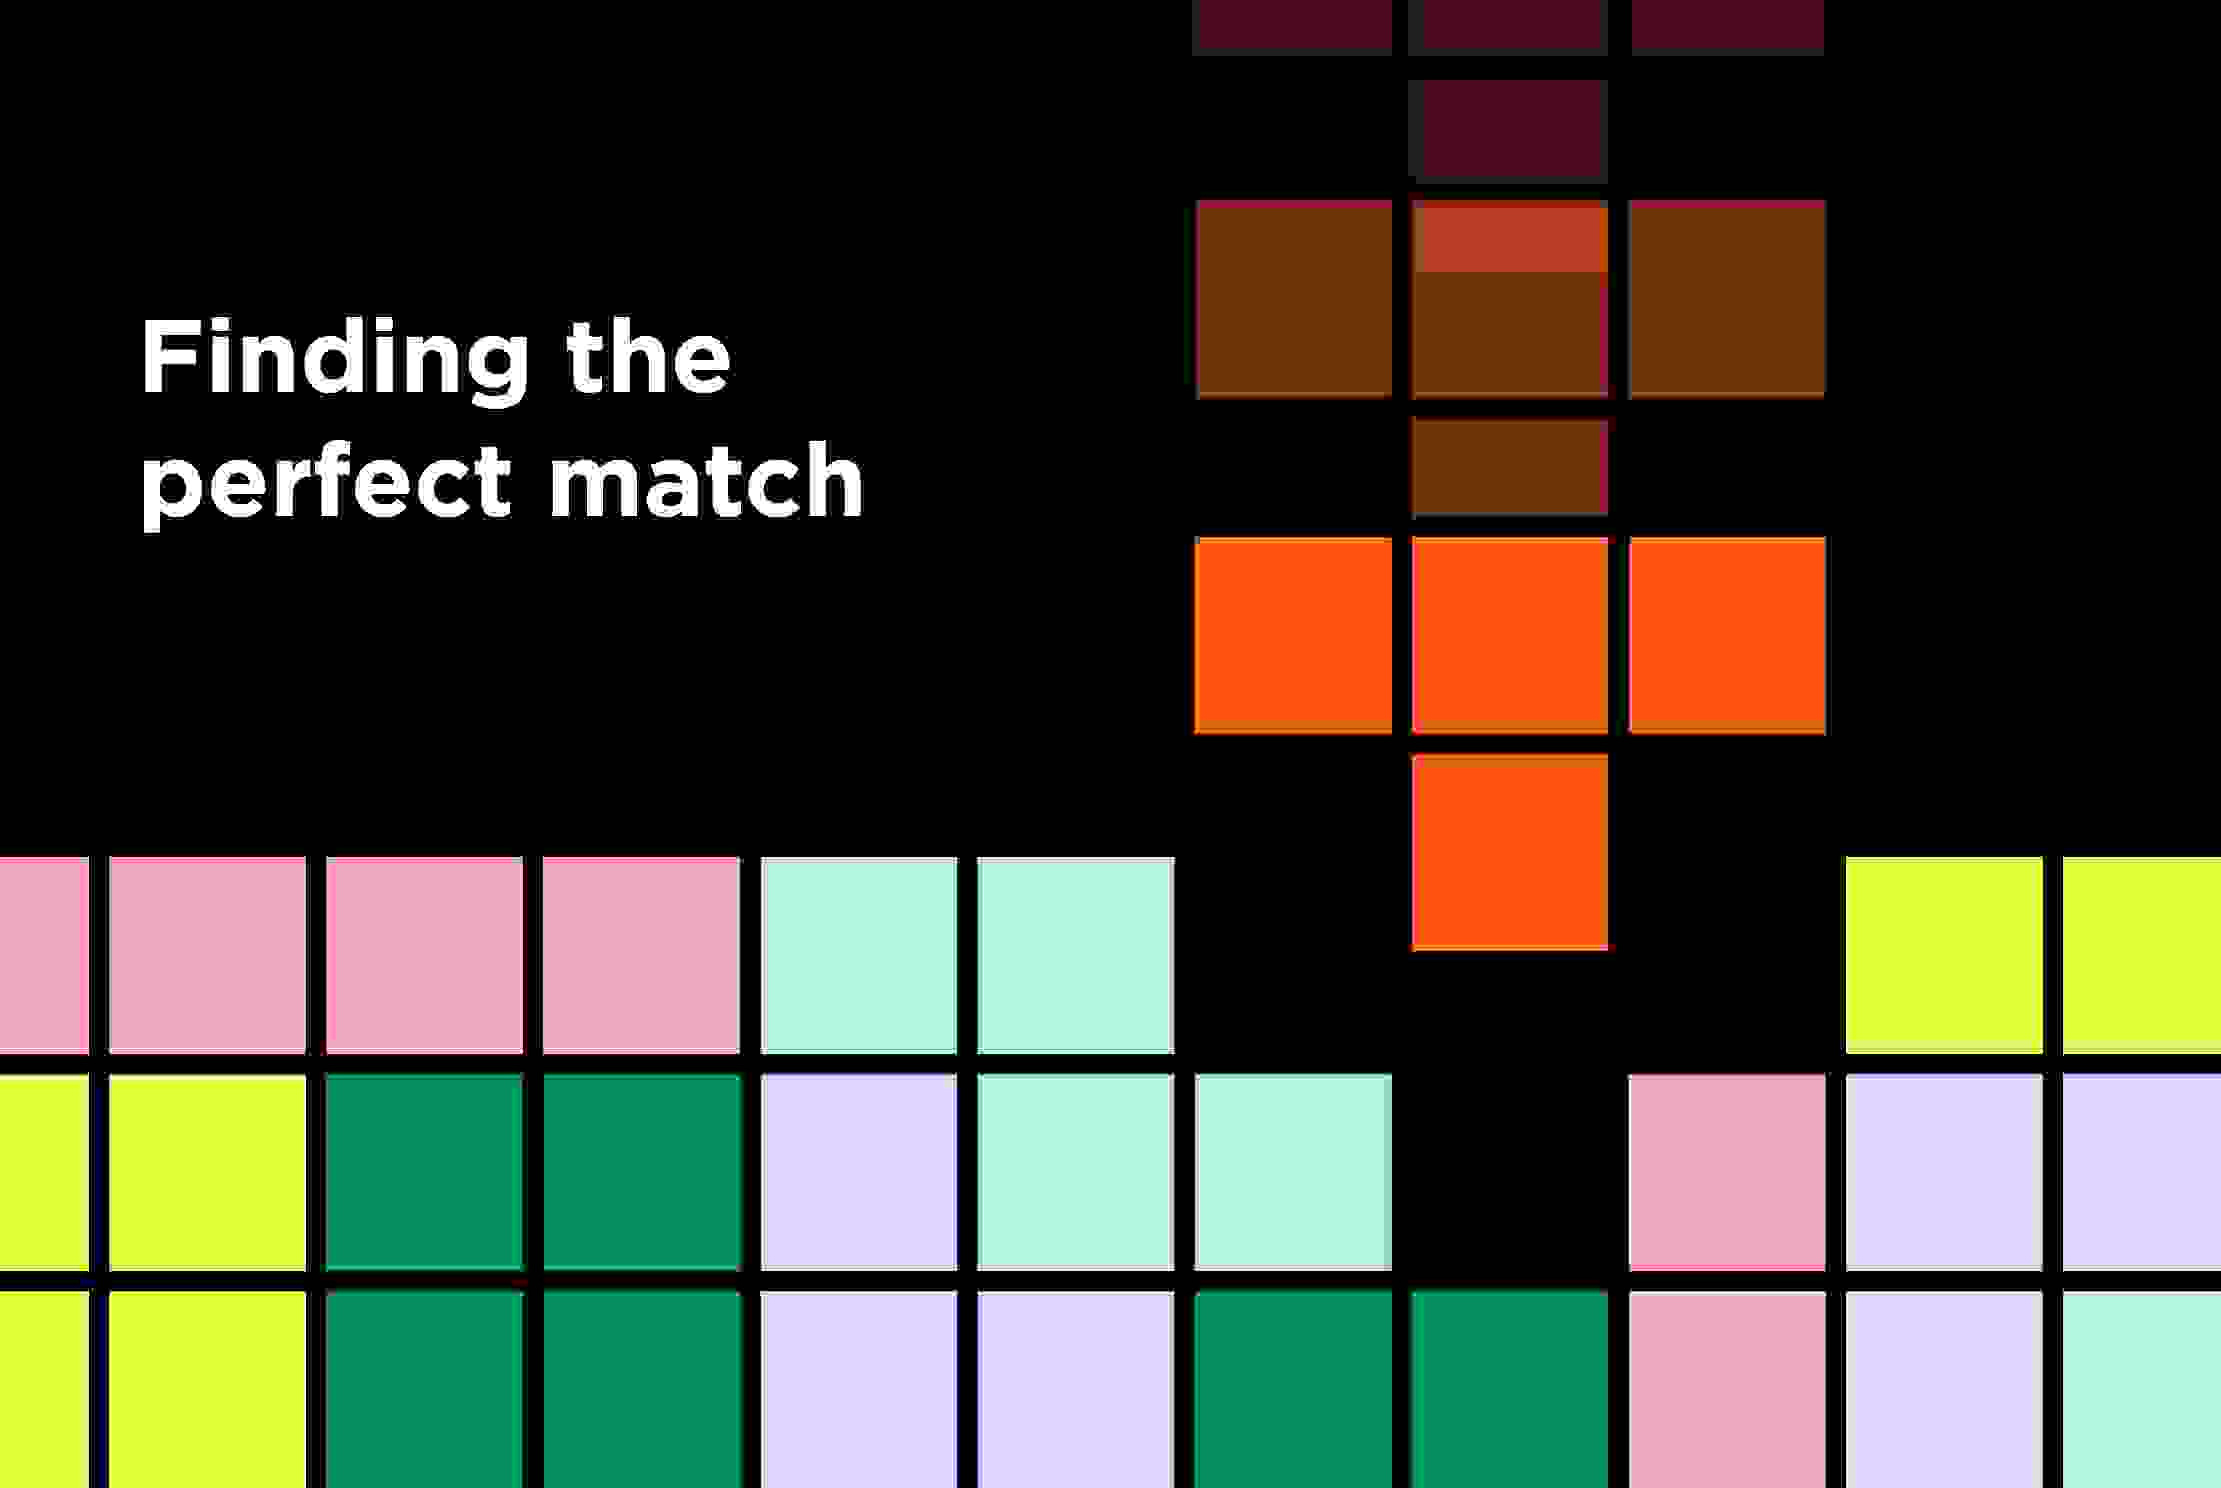 Puzzle graphic for finding a perfect match